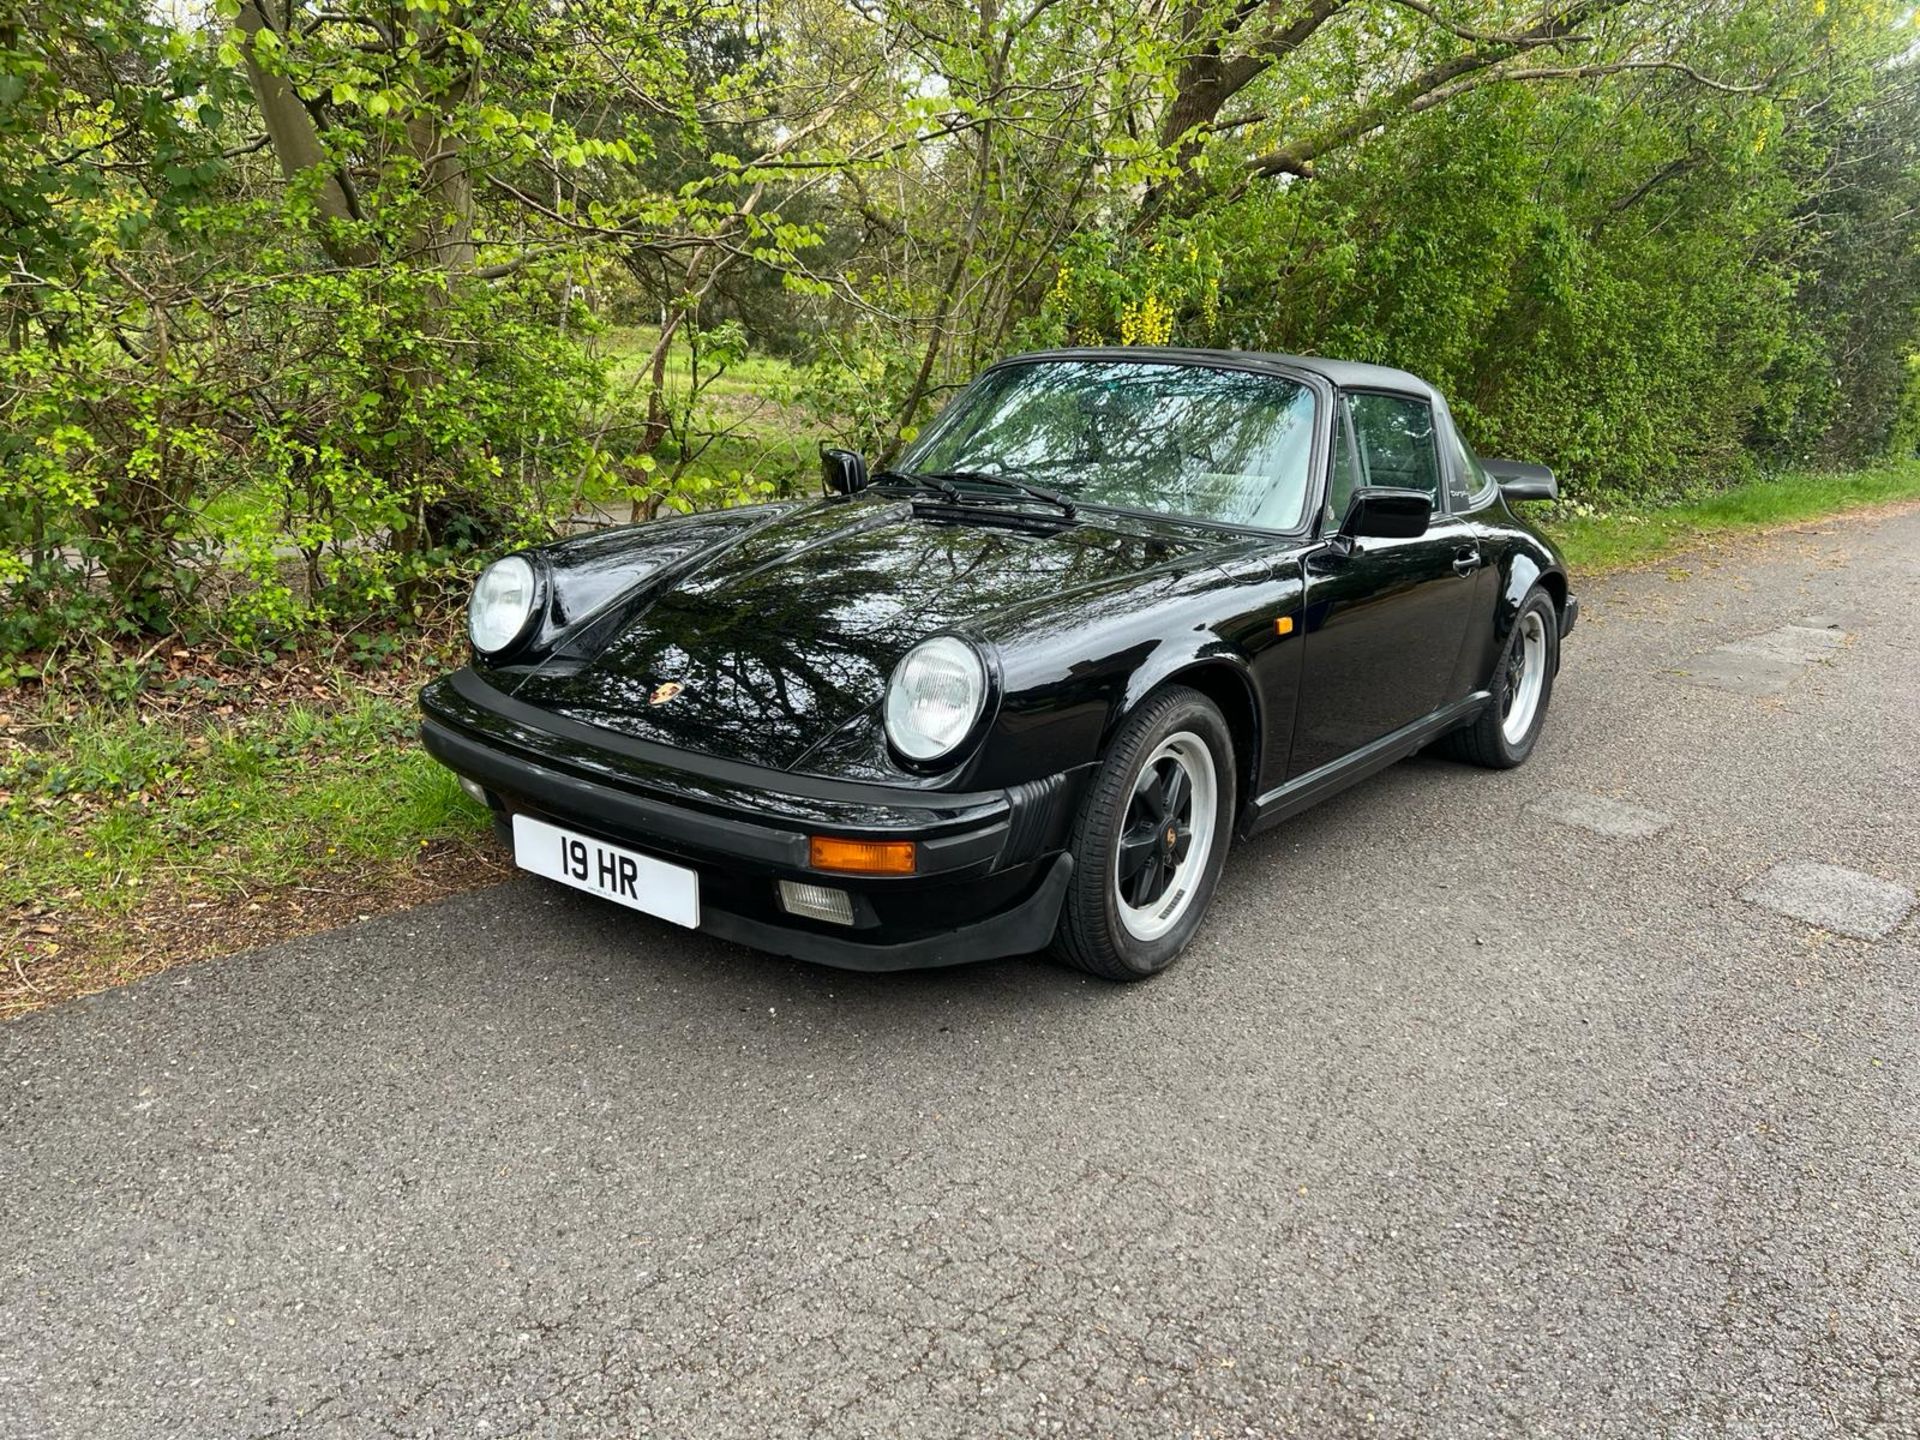 1988 Porsche Carrera Targa 3.2 - 61,000 miles of which only 3500 in past 25 years with current owner - Image 4 of 15